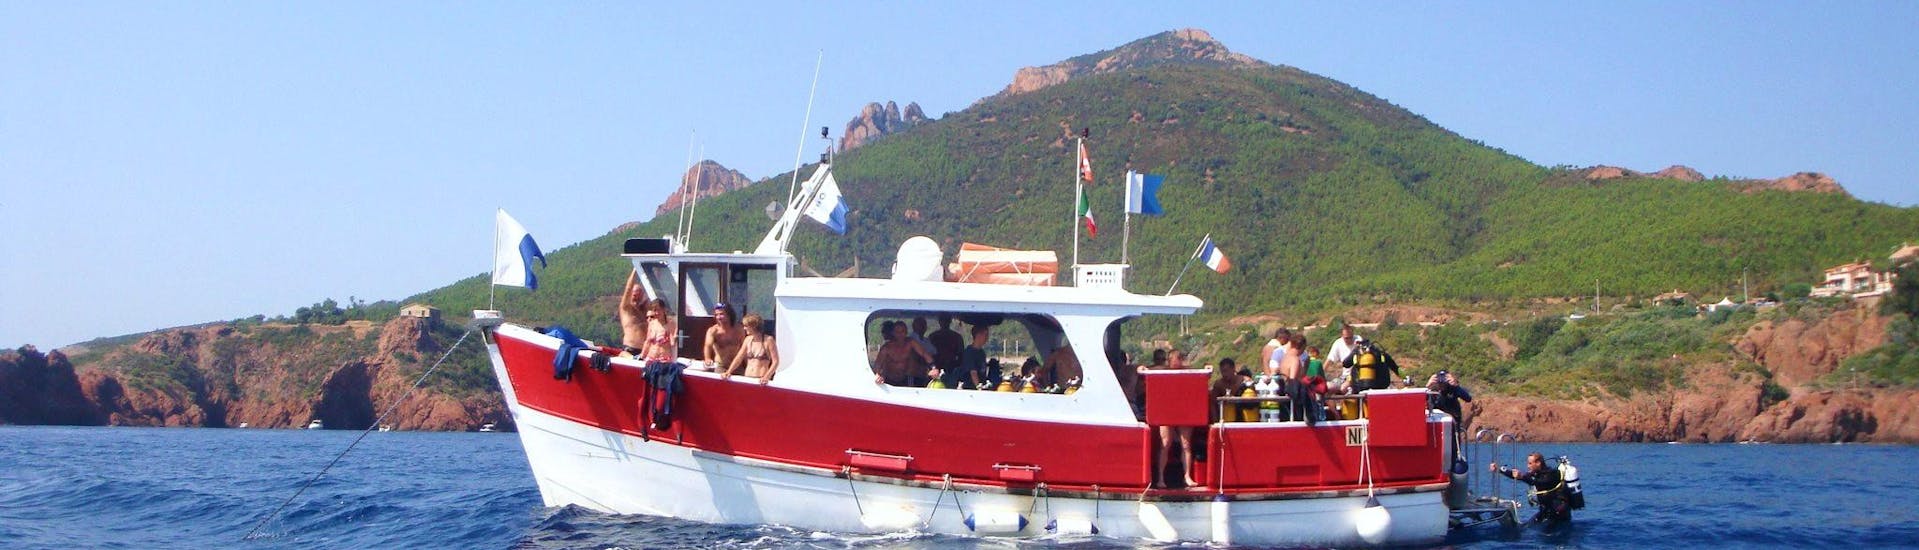 View of the Dive Center La Rague boat in front of the Estérel massif used for the Snorkeling Afternoon near Cannes.